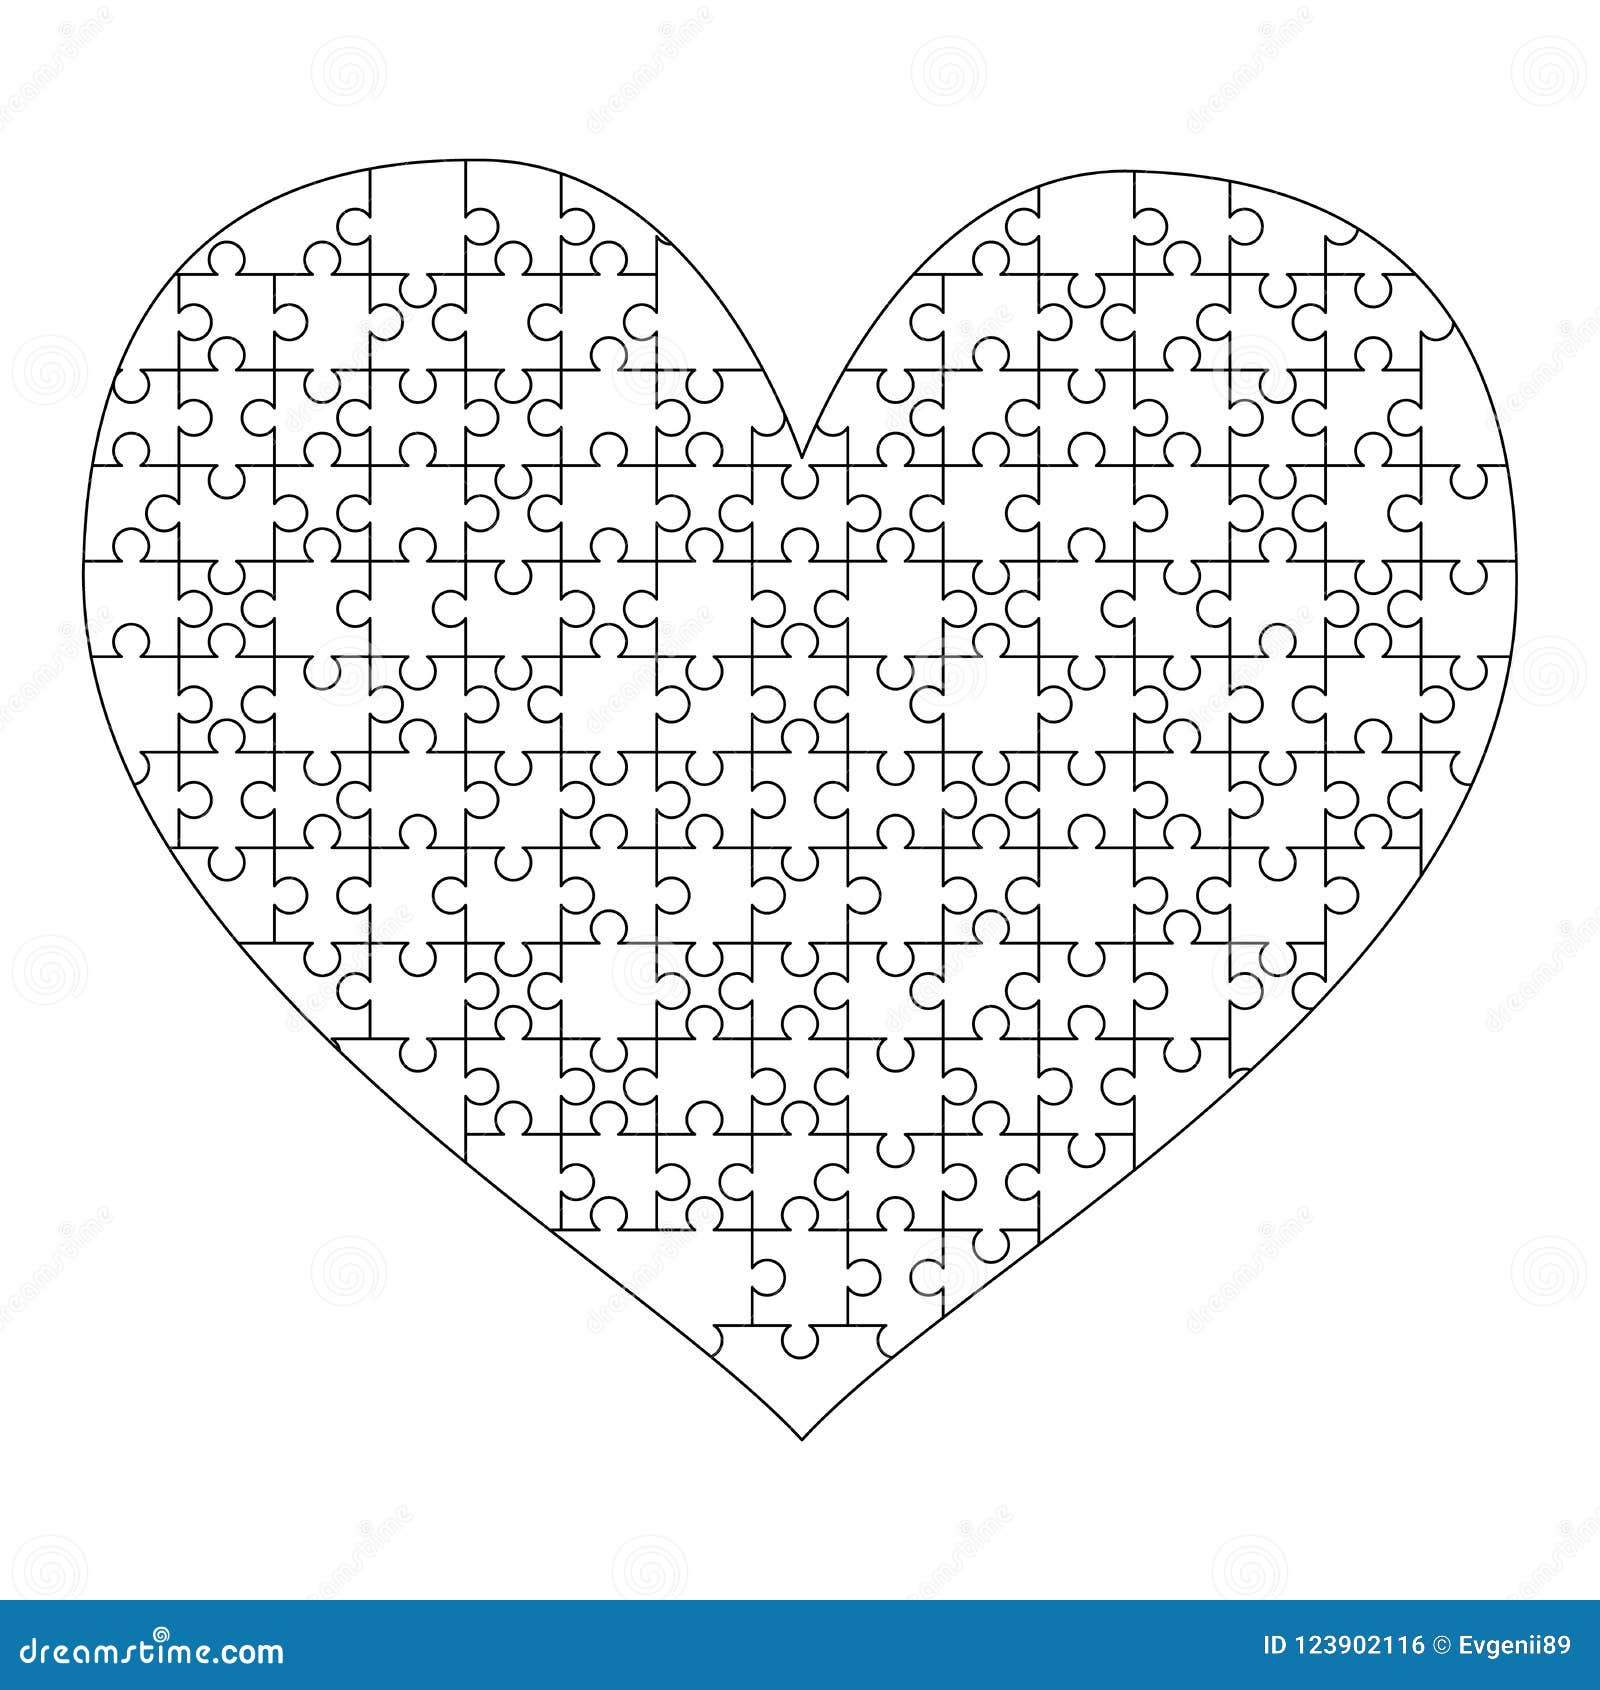 white-puzzles-pieces-arranged-in-a-heart-shape-medium-jigsaw-puzzle